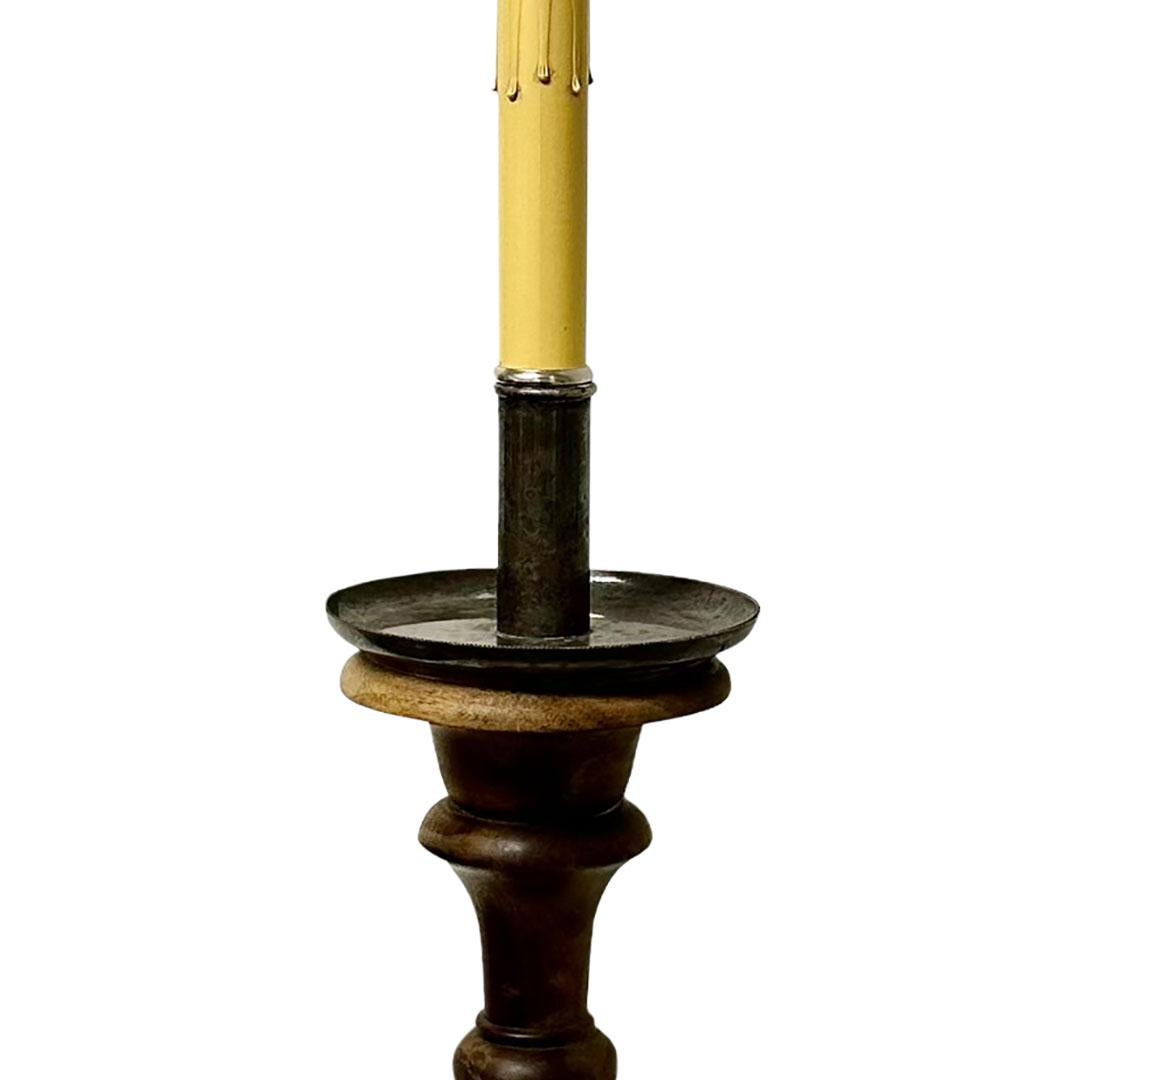 A single wood candlestick converted into a lamp with a new cord, plug and harp. France, circa 1890s.